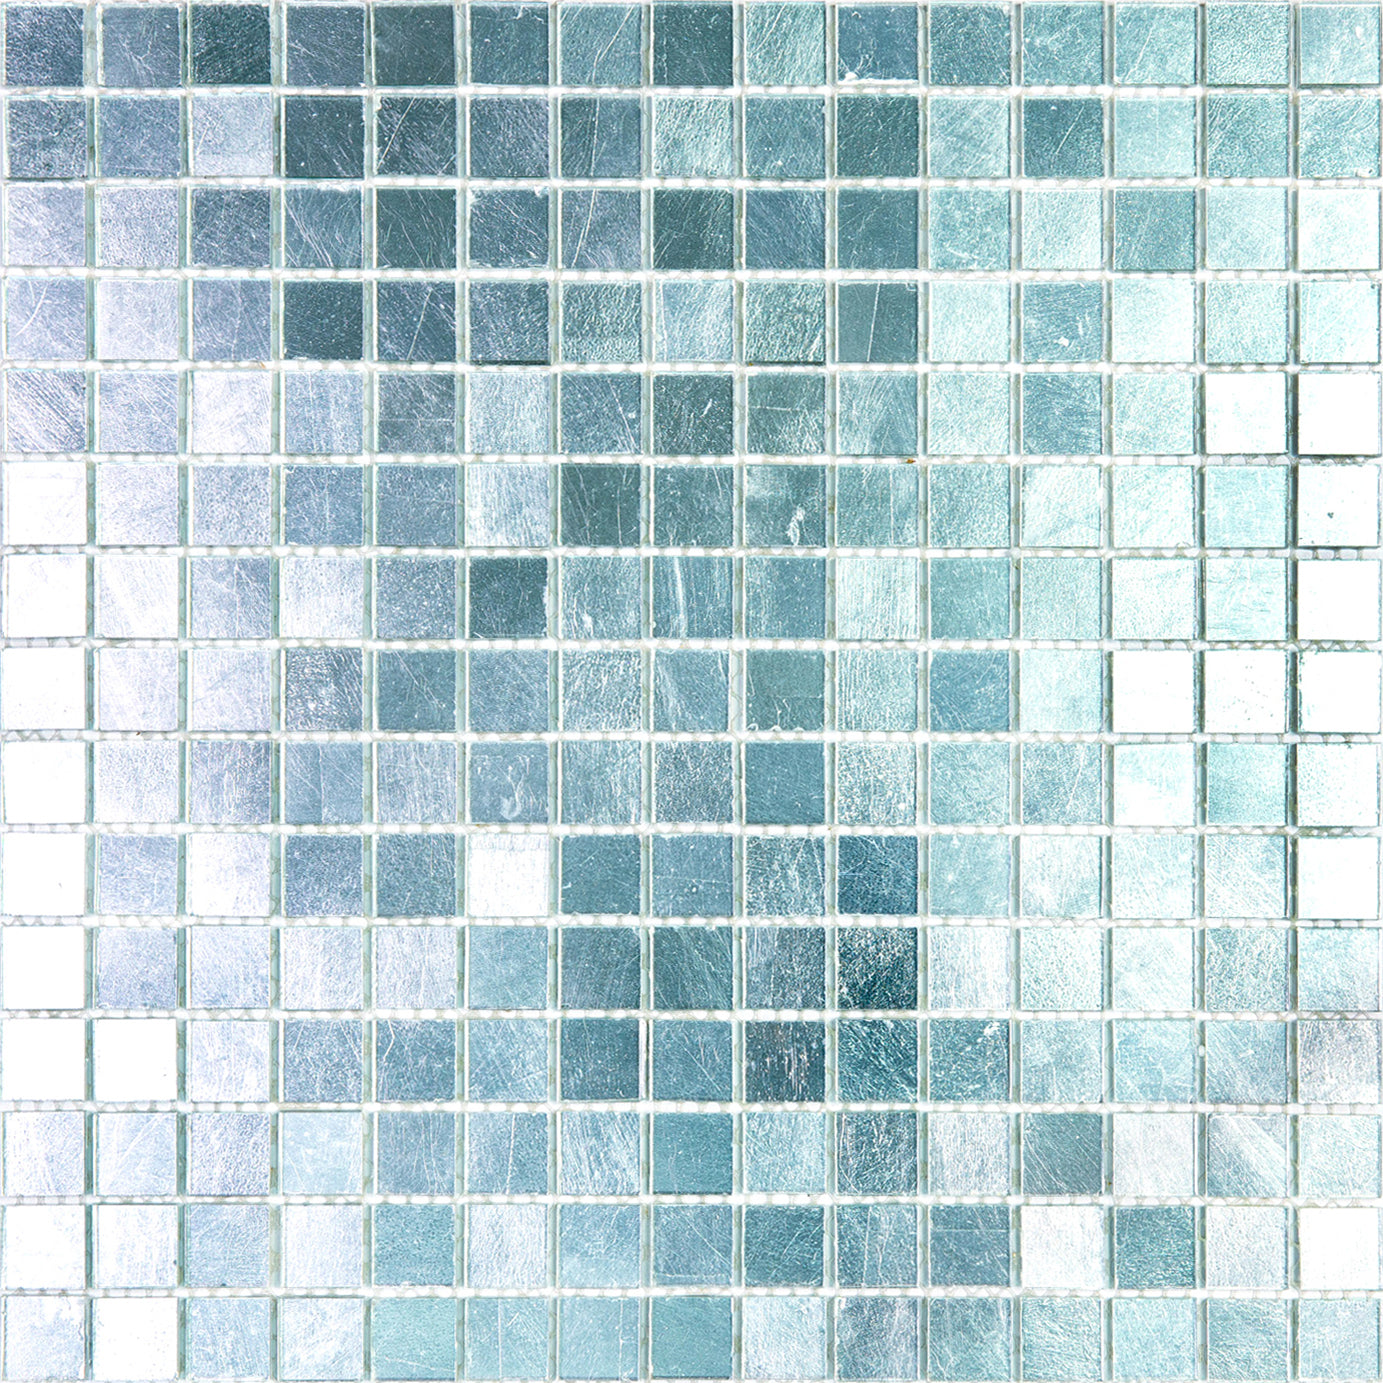 mir alma solid colors 0_8 inch fg s25 2 wall and floor mosaic distributed by surface group natural materials